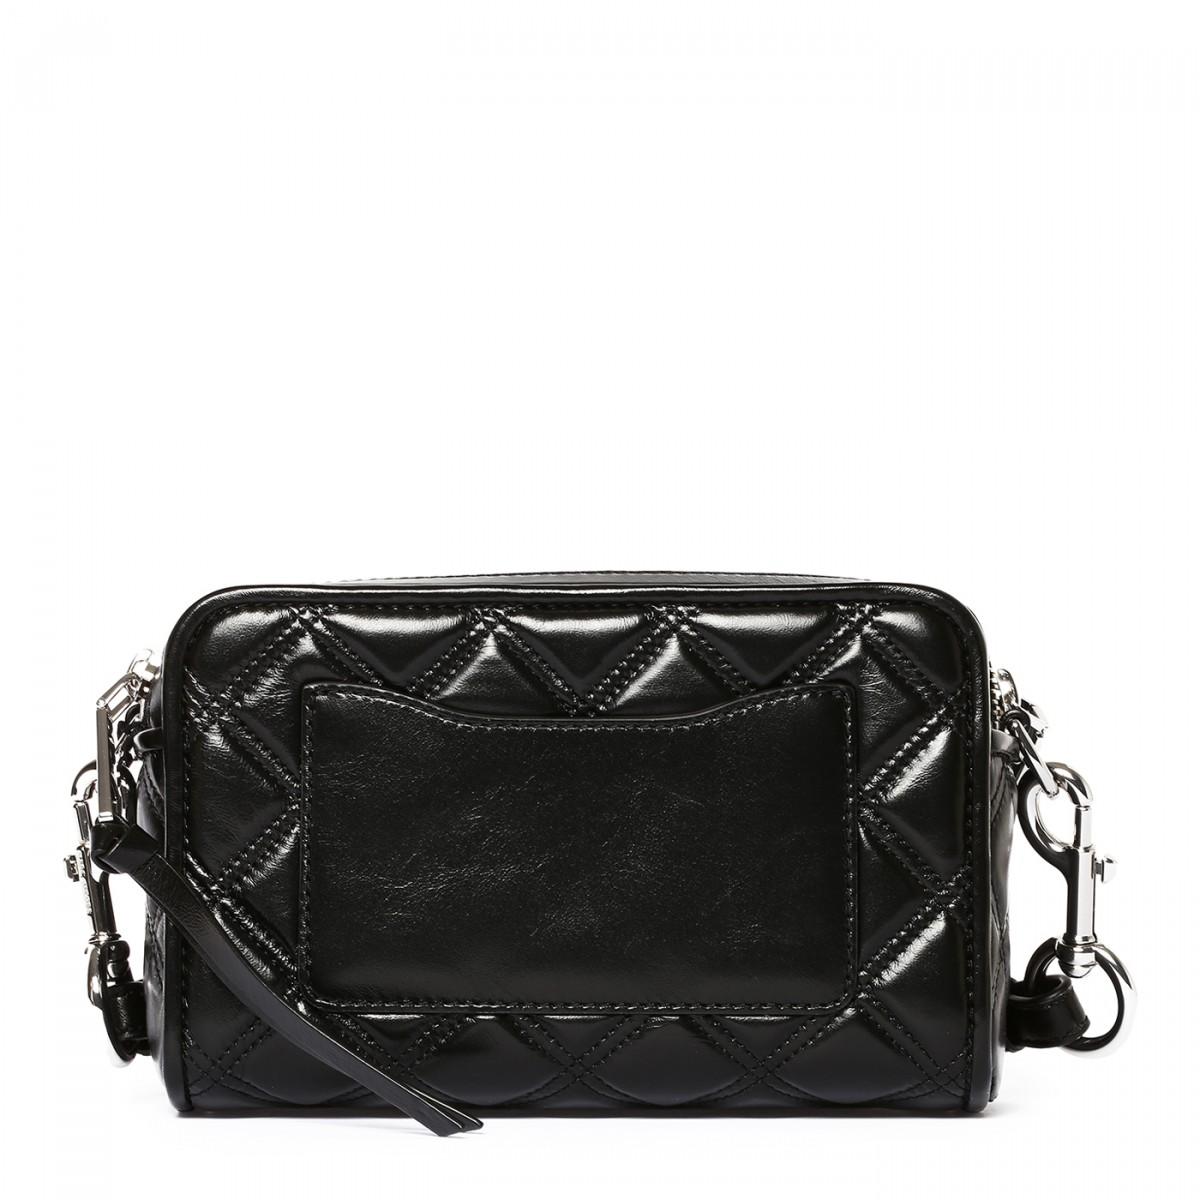 Marc Jacobs Leather Quilted Logo Embellished Bag in Black - Lyst